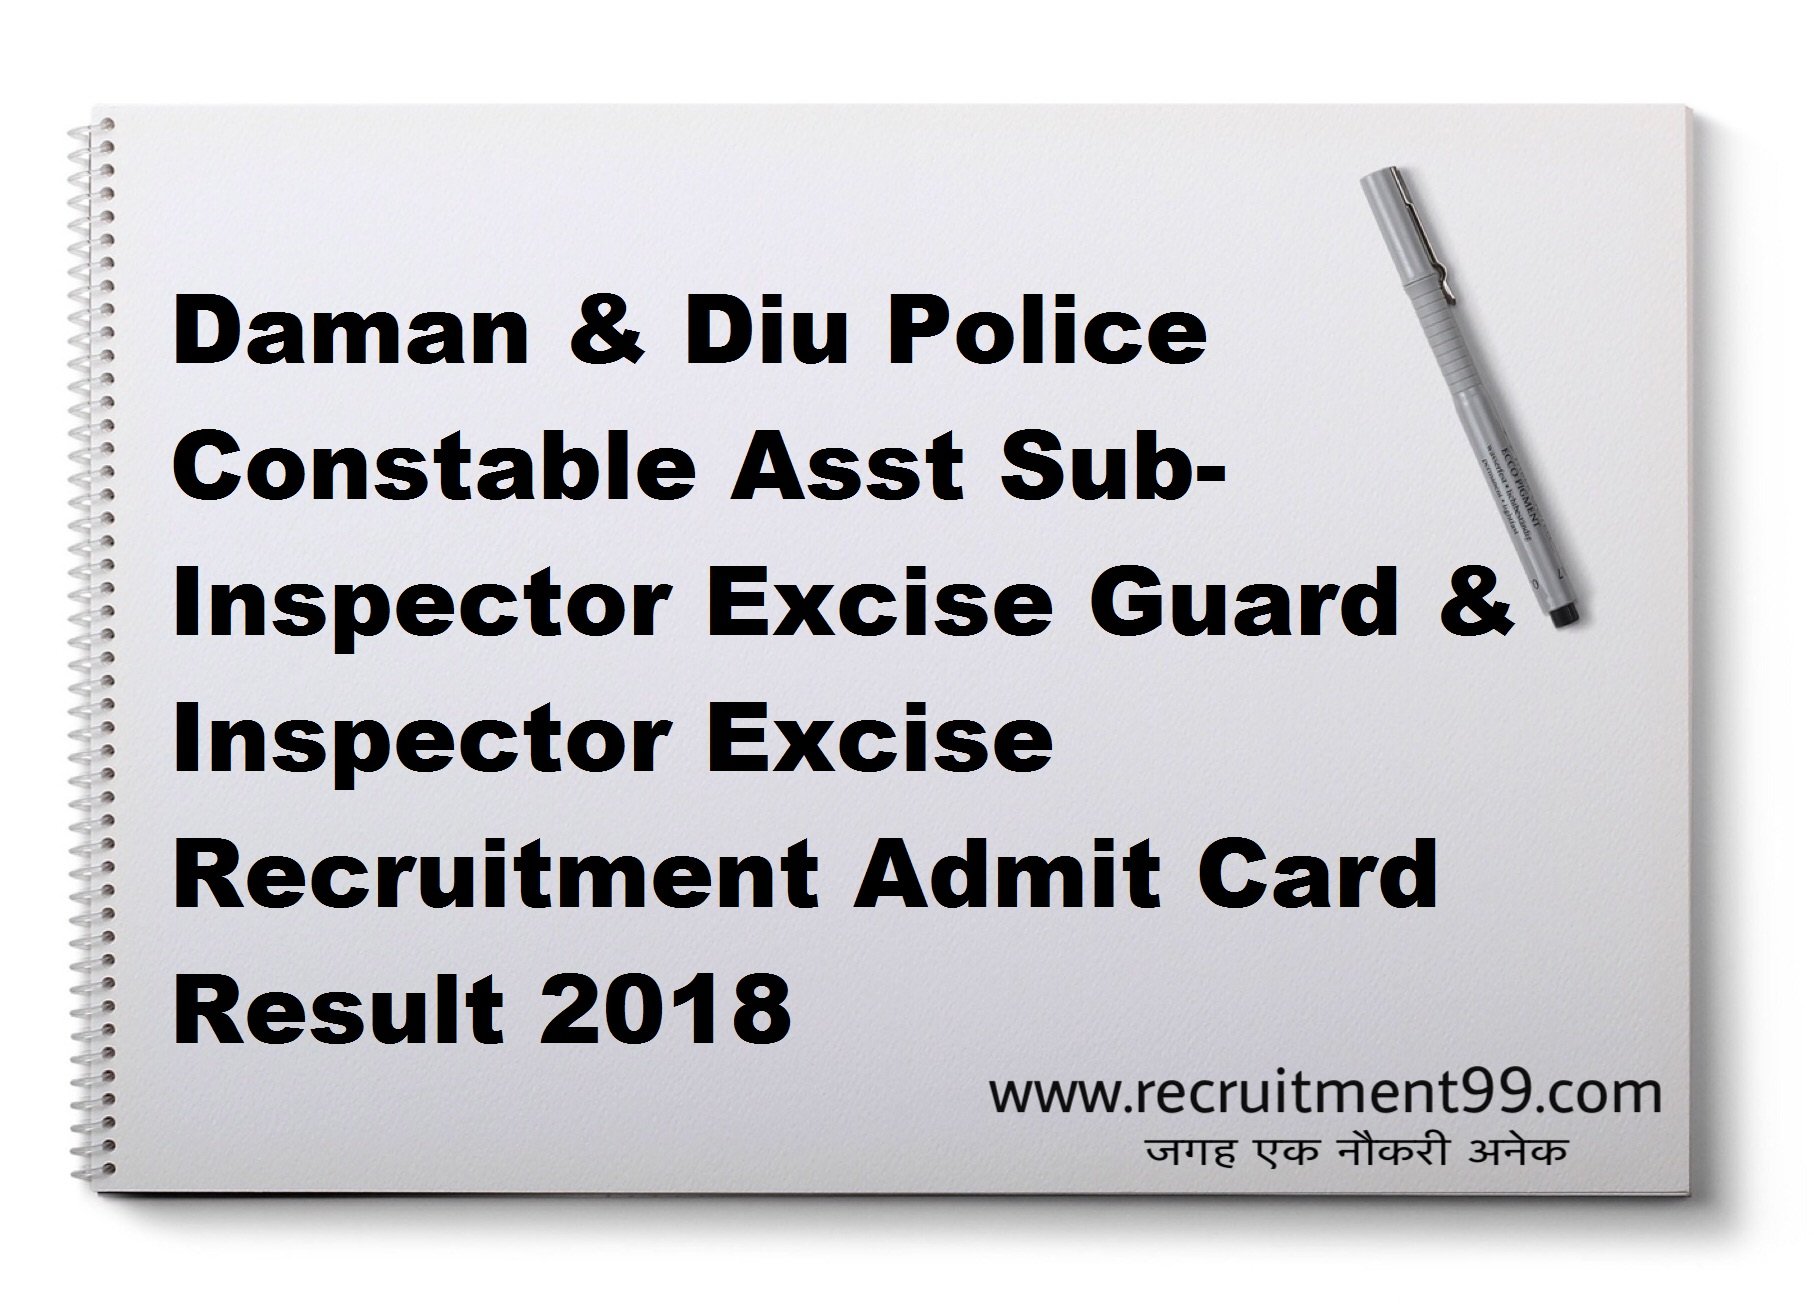 Daman & Diu Police Constable Asst Sub-Inspector Excise Guard & Inspector Excise Recruitment Admit Card Result 2018